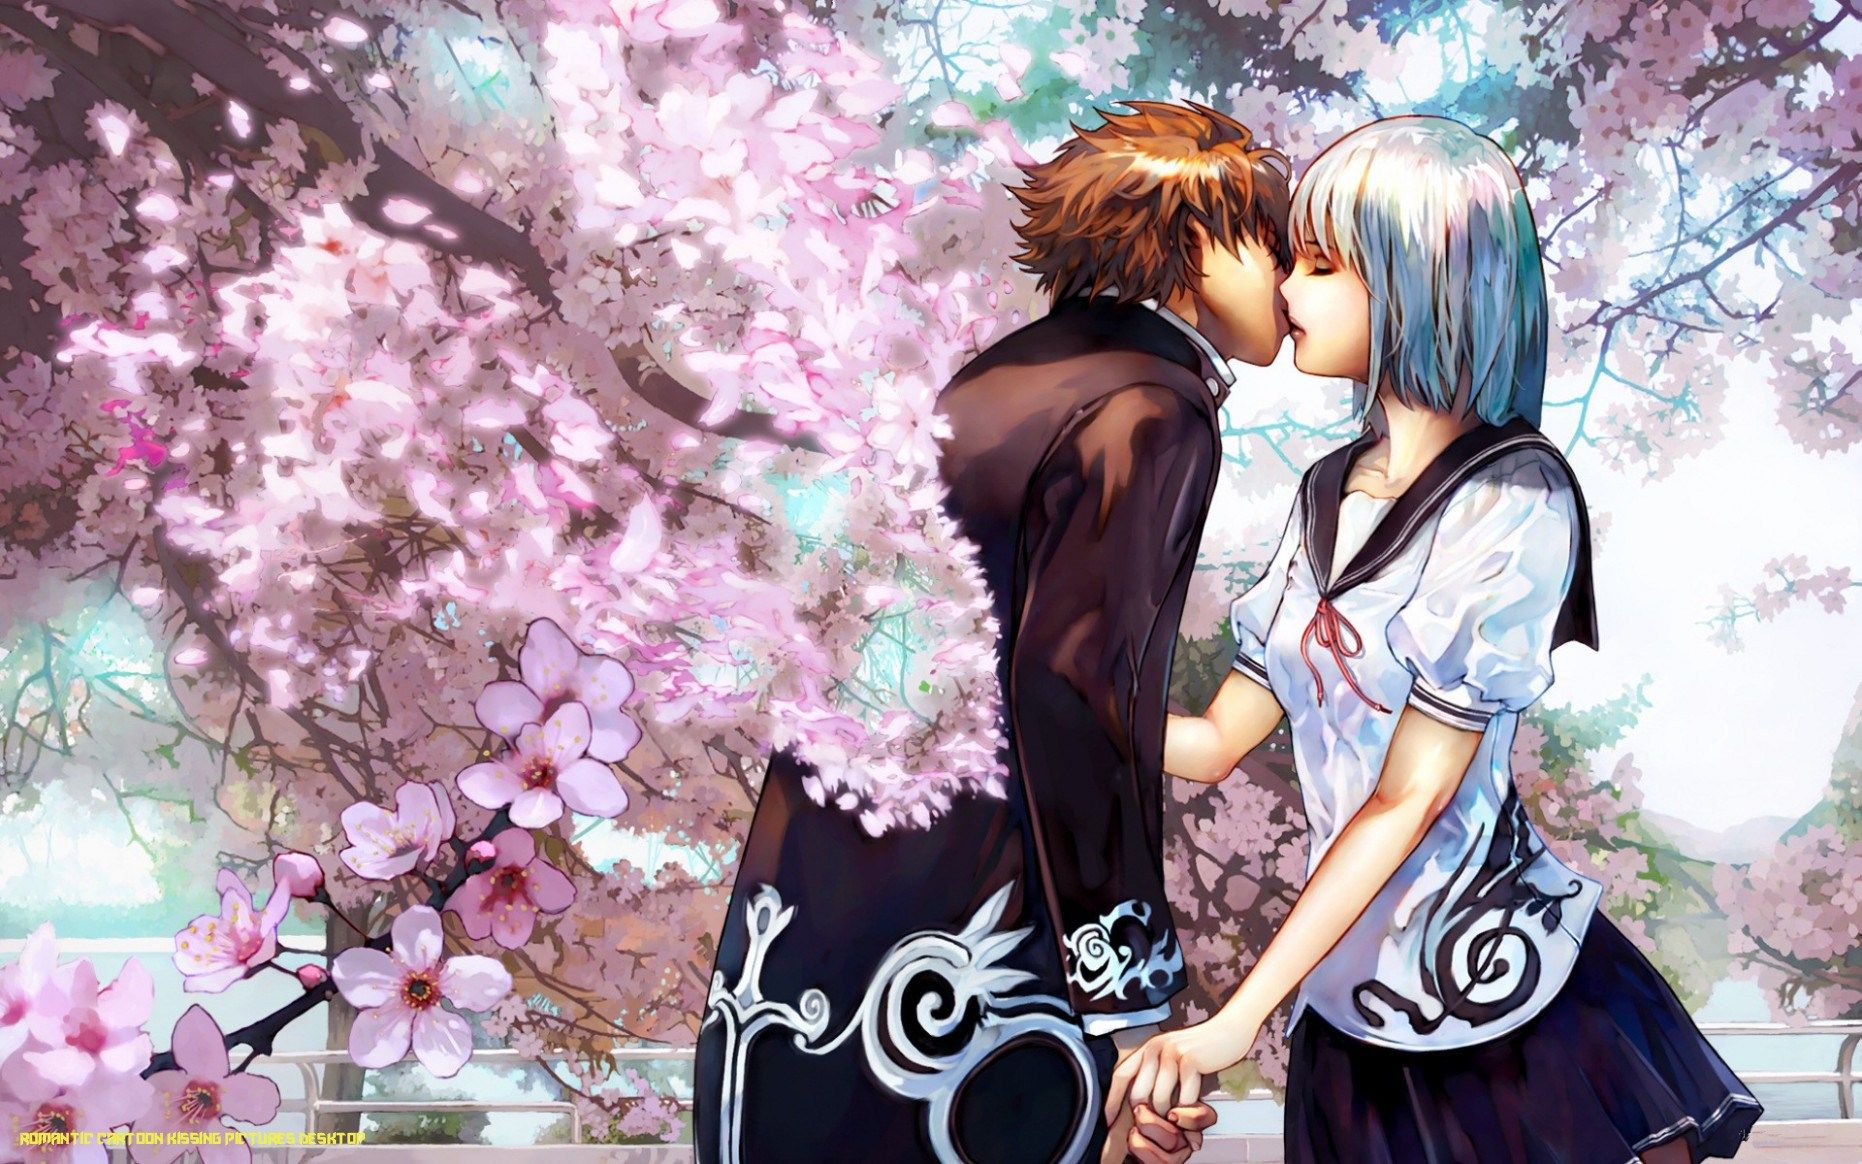 Anime Boy And Girl Kissing On White Royalty Free SVG, Cliparts, Vectors,  and Stock Illustration. Image 206118764.